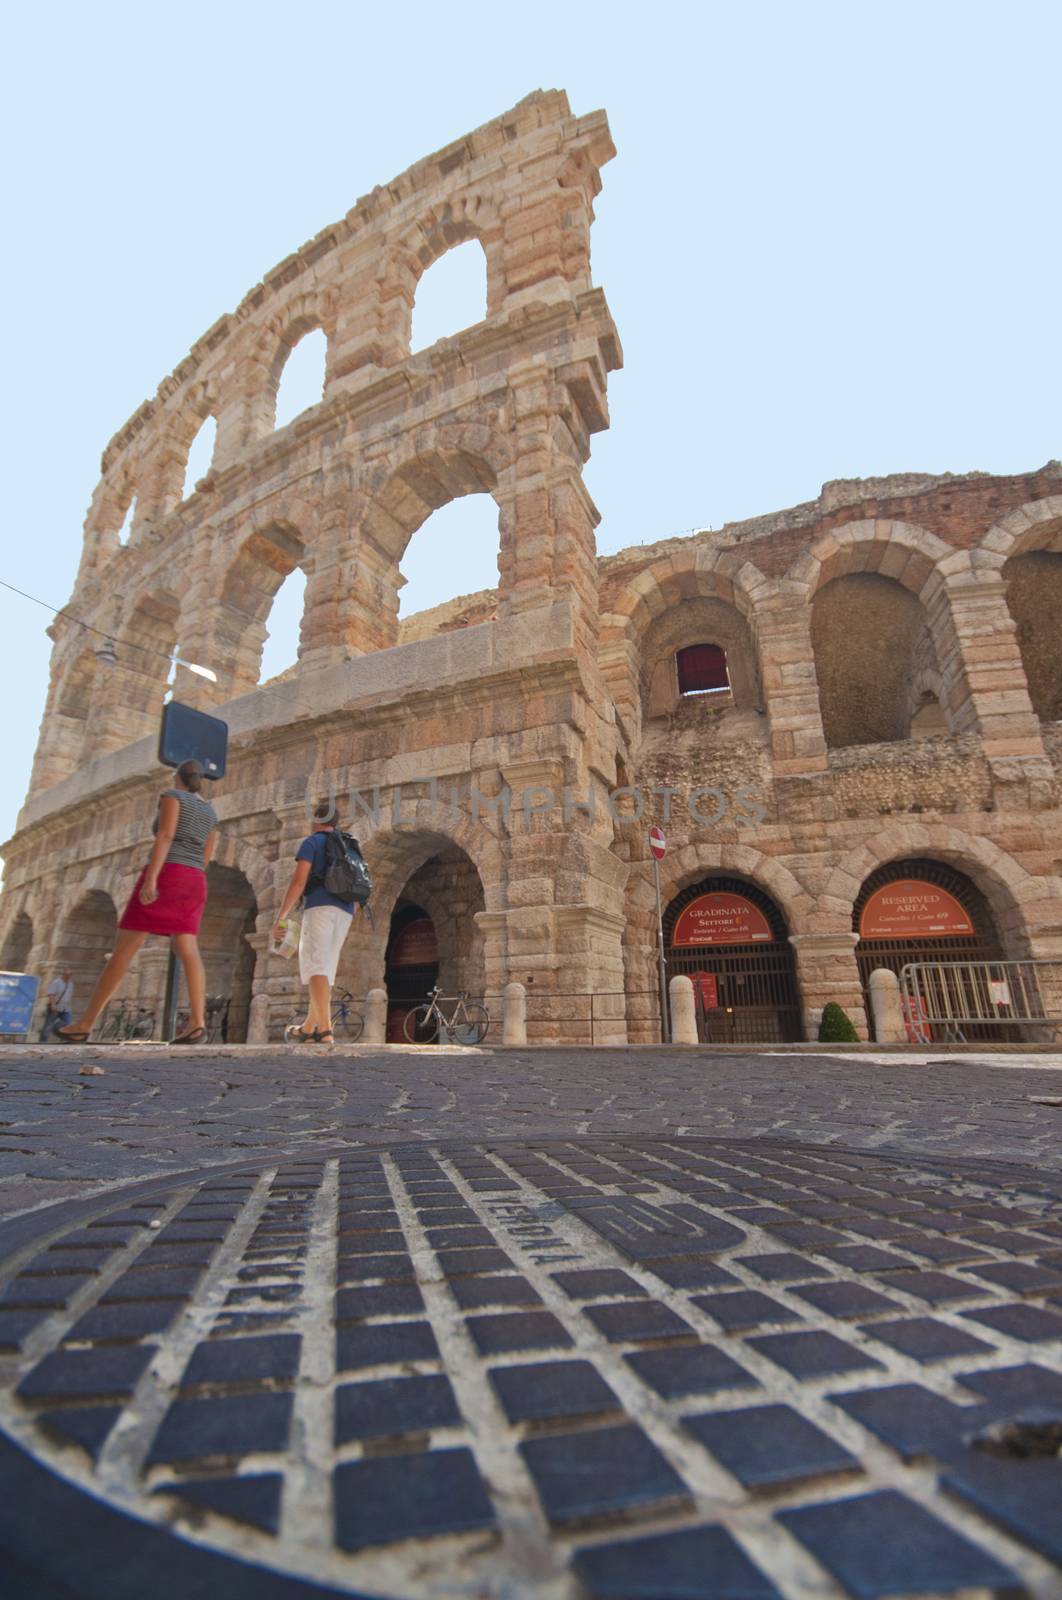 Arena di Verona. Sightseeing in Italy